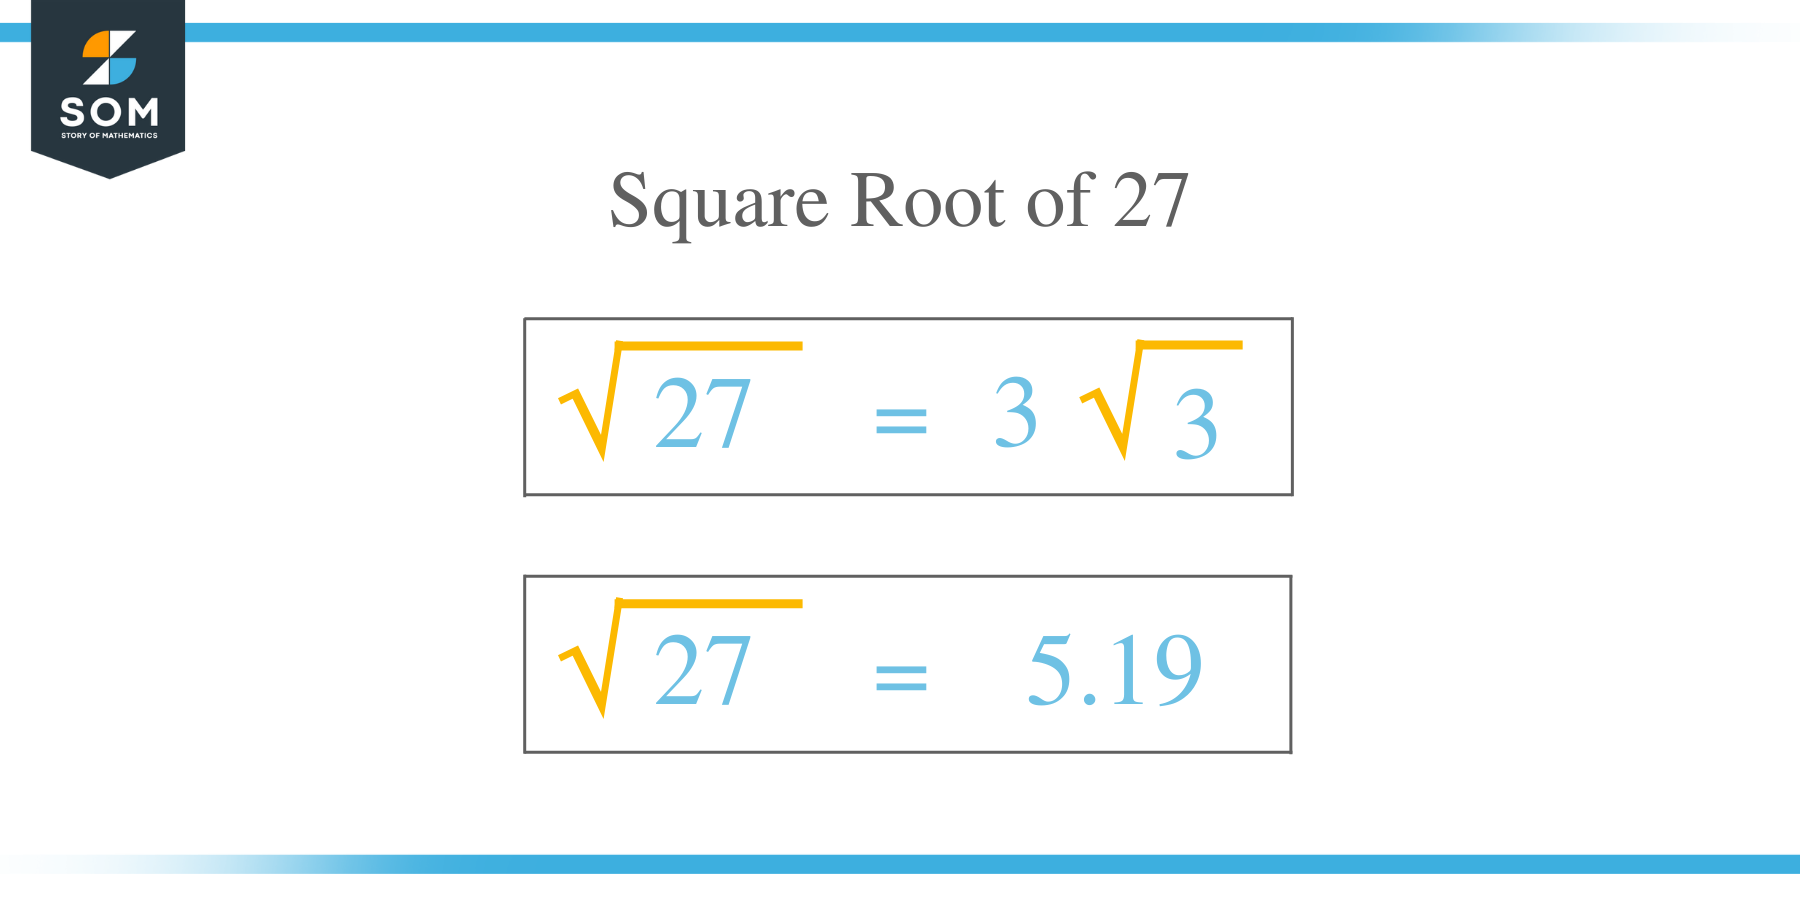 Square Root of 27